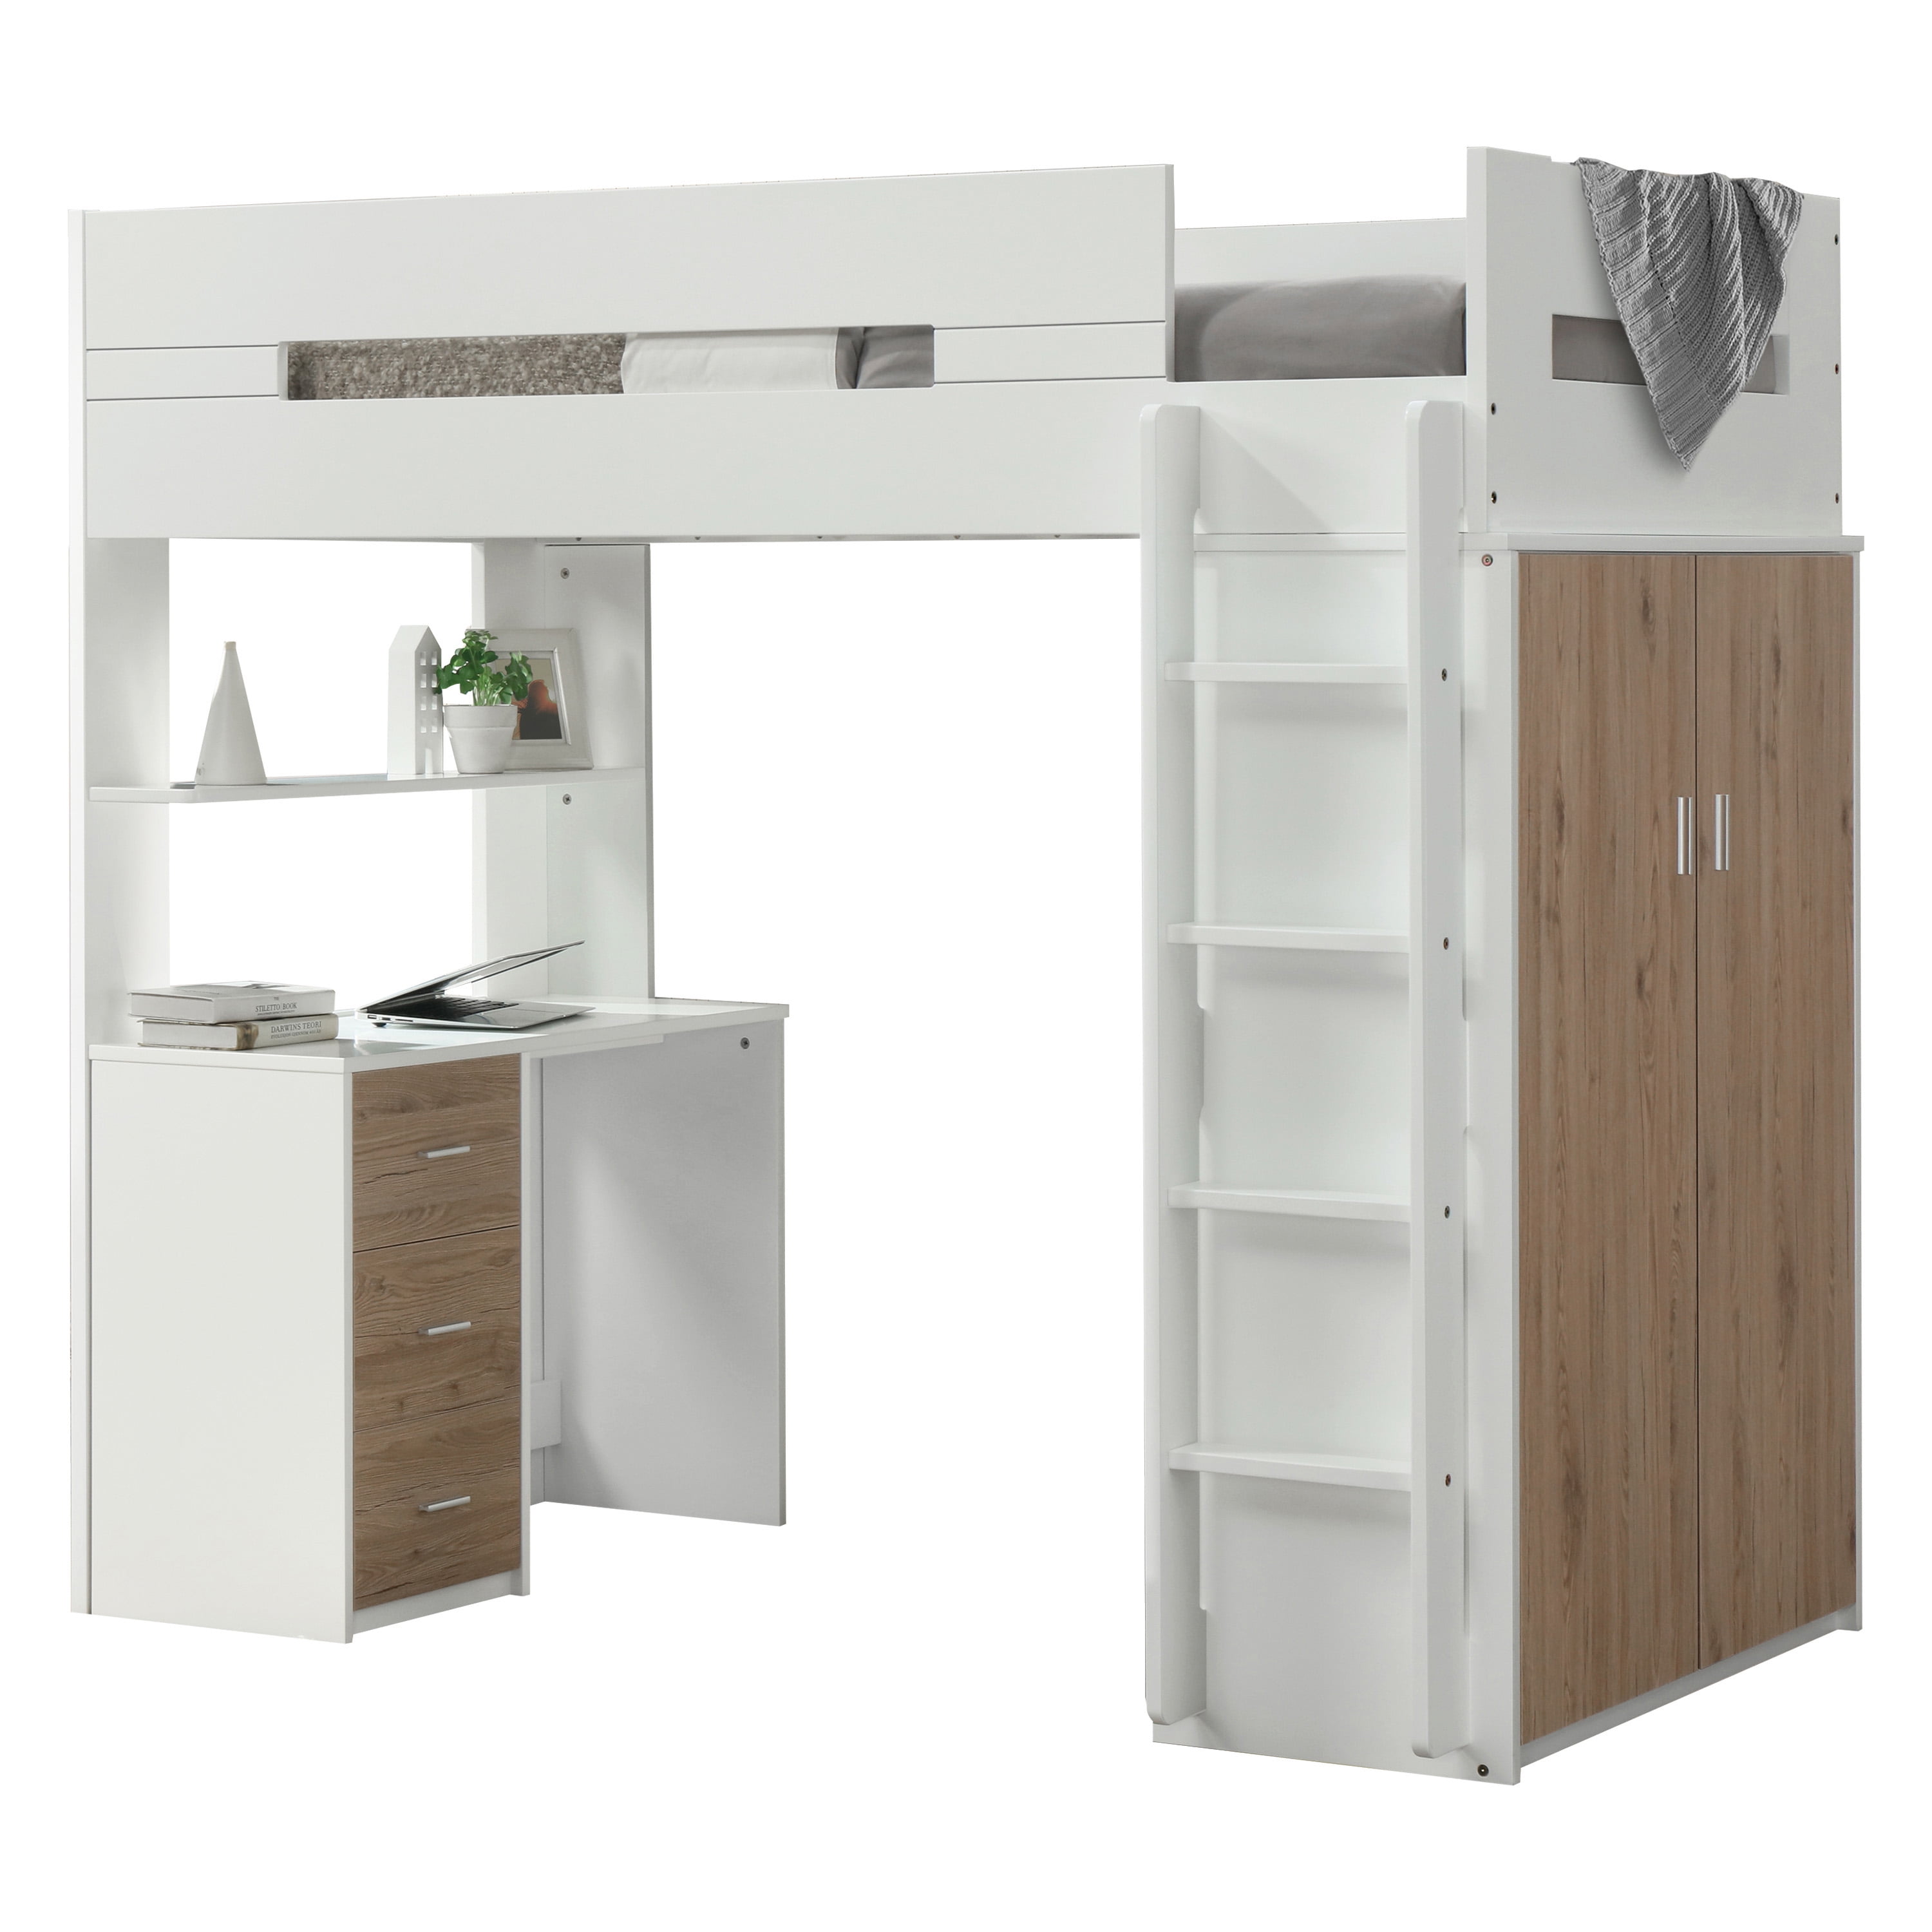 twin bunk bed with desk